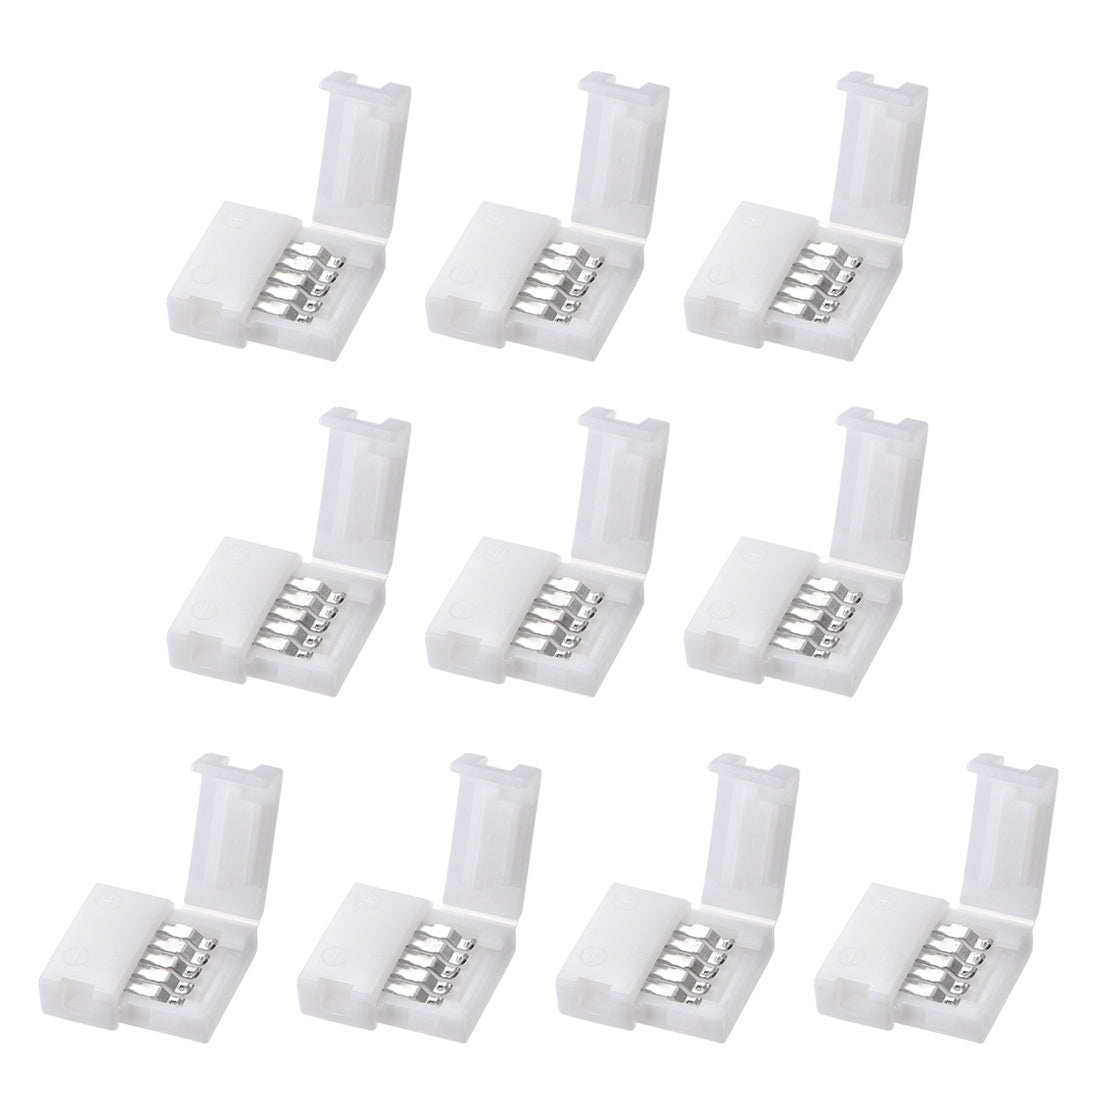 Uxcell Uxcell 10mm 5P LED Strip Connector Solderless for 5050 3528 RGBW Strip Lights 10Pcs